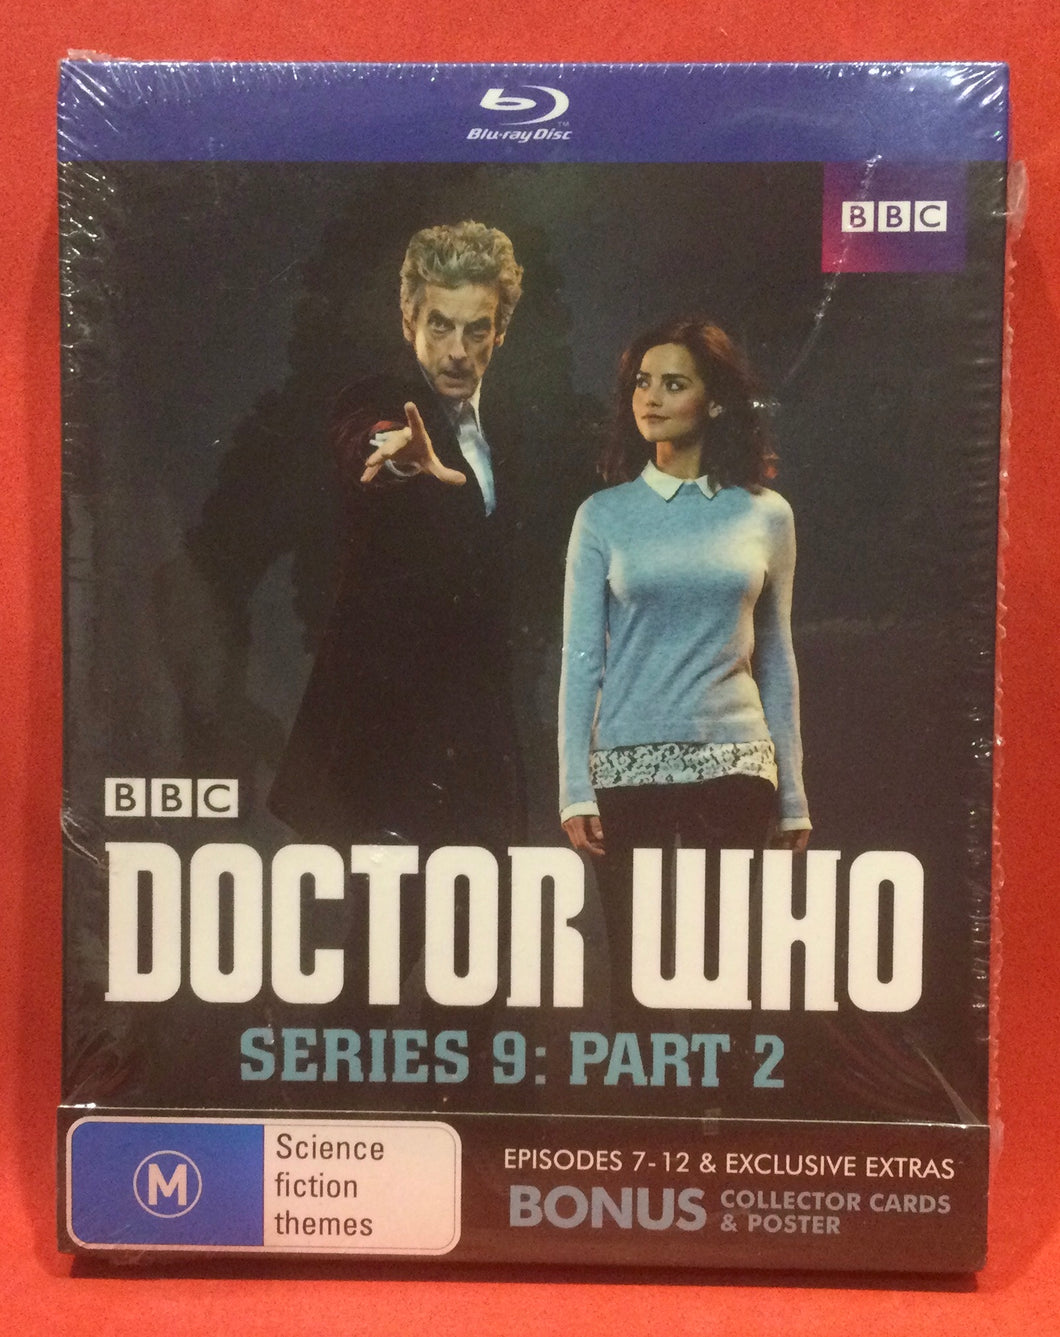 DOCTOR WHO - SERIES 9 PART 2 - BONUS COLLECTOR CARDS & POSTER - BLU-RAY (SEALED)